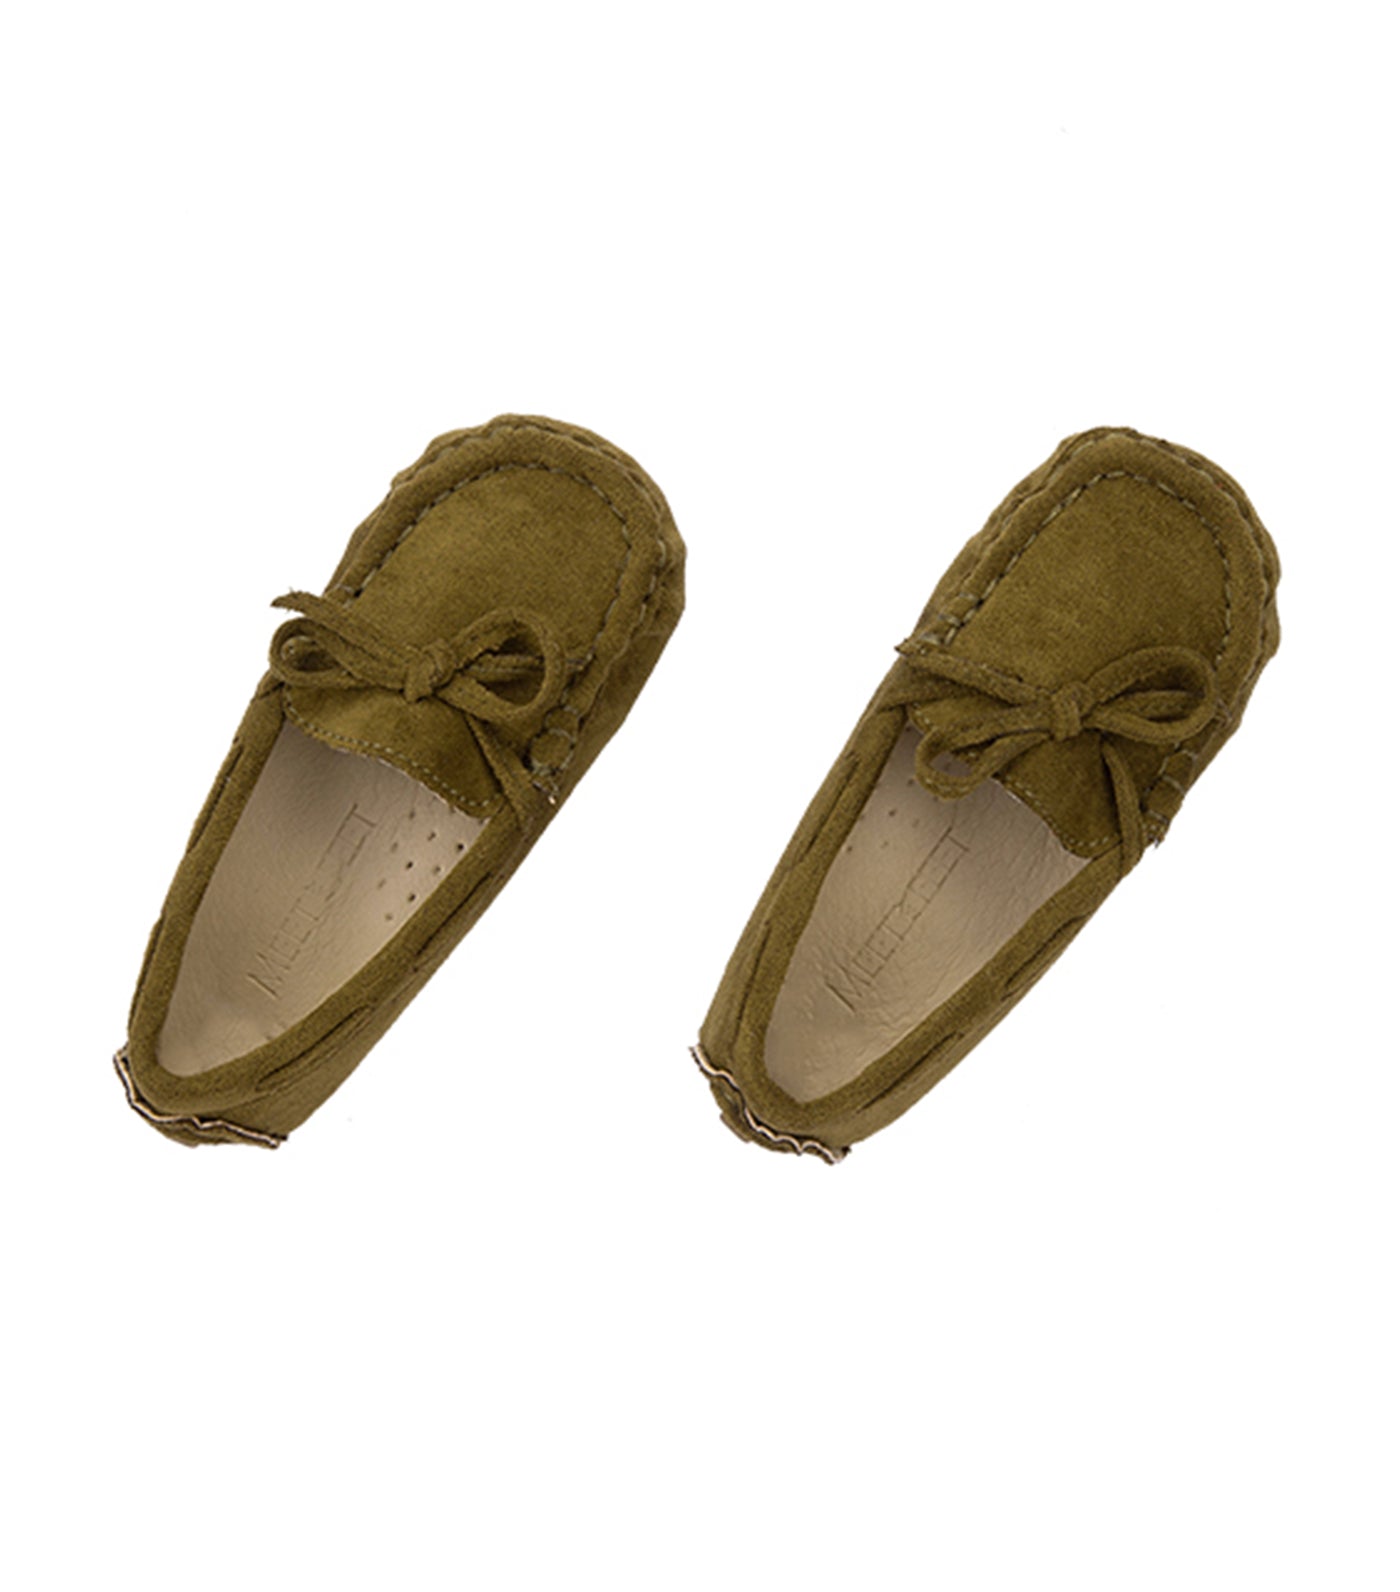 Safi Loafers for Boys - Army Green